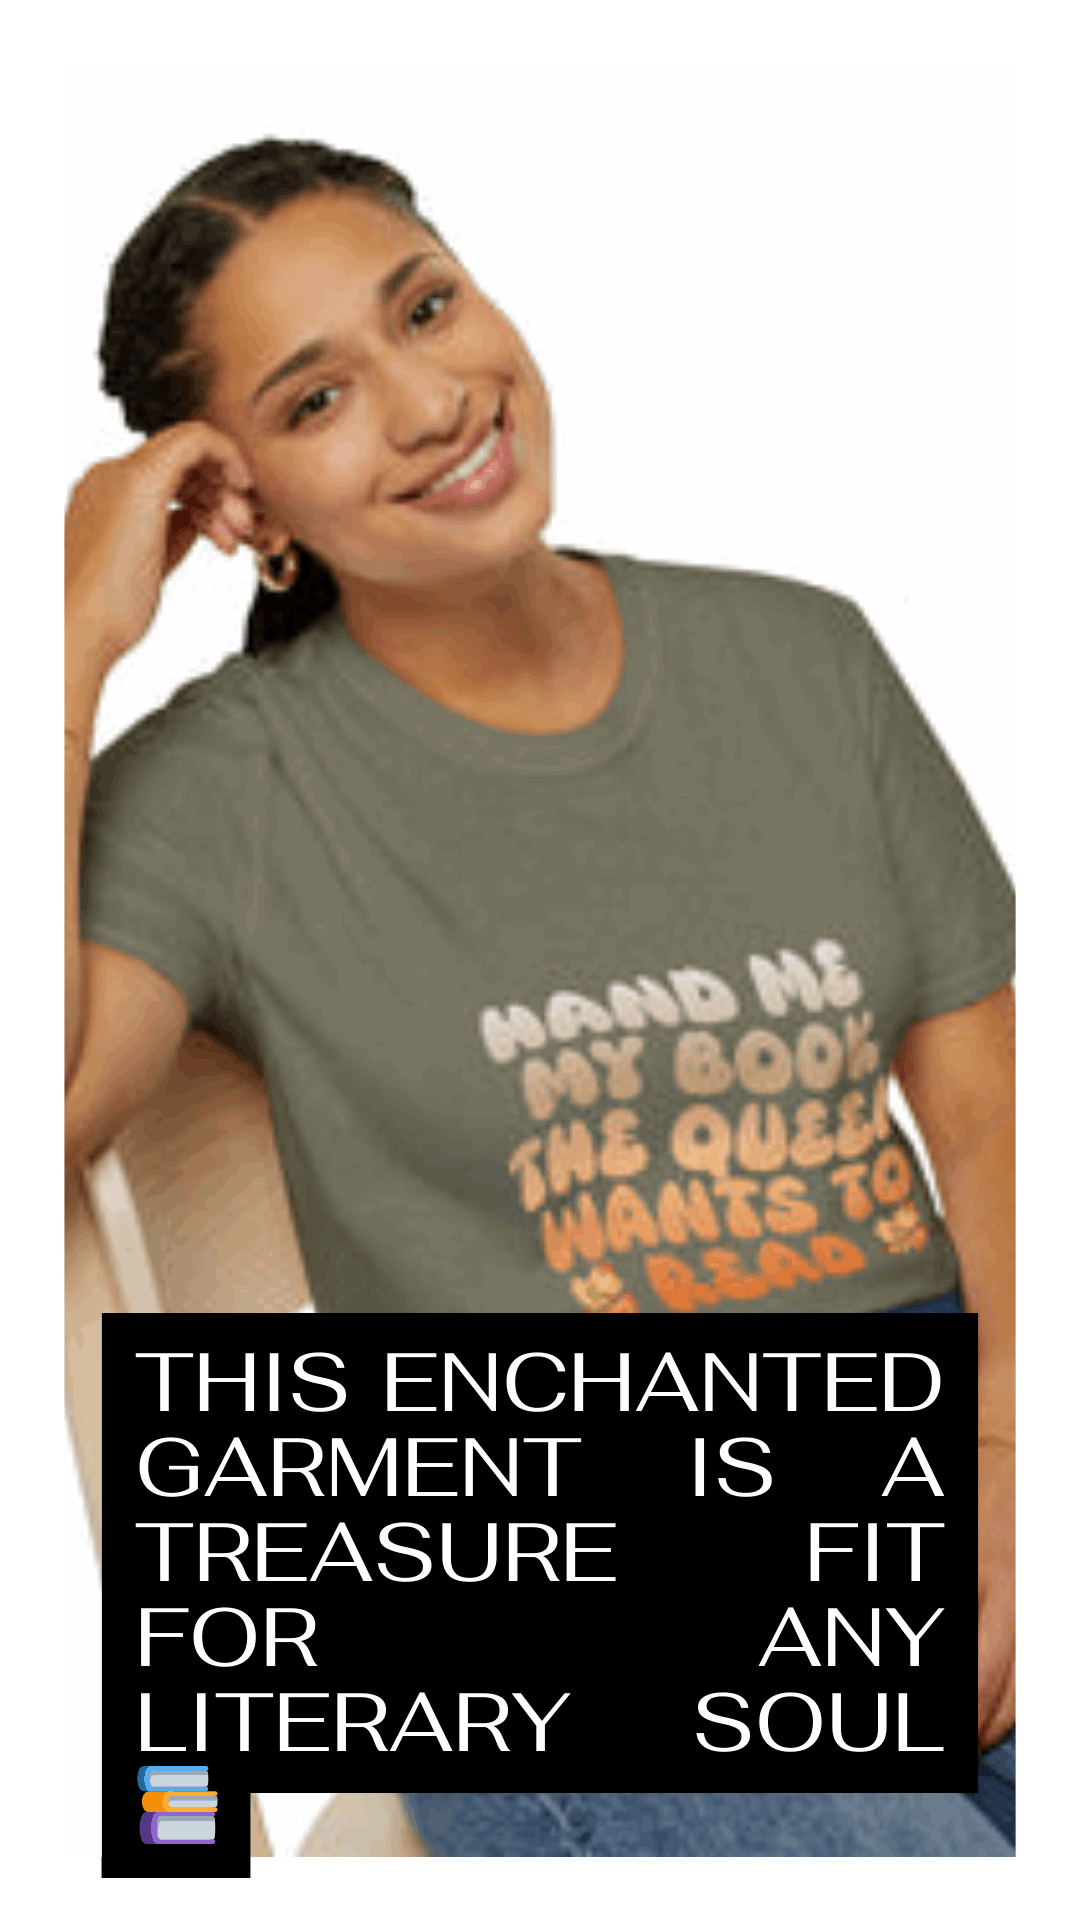 "Give Me My Book The Queen Wants to Read" Unisex Soft style T-Shirt